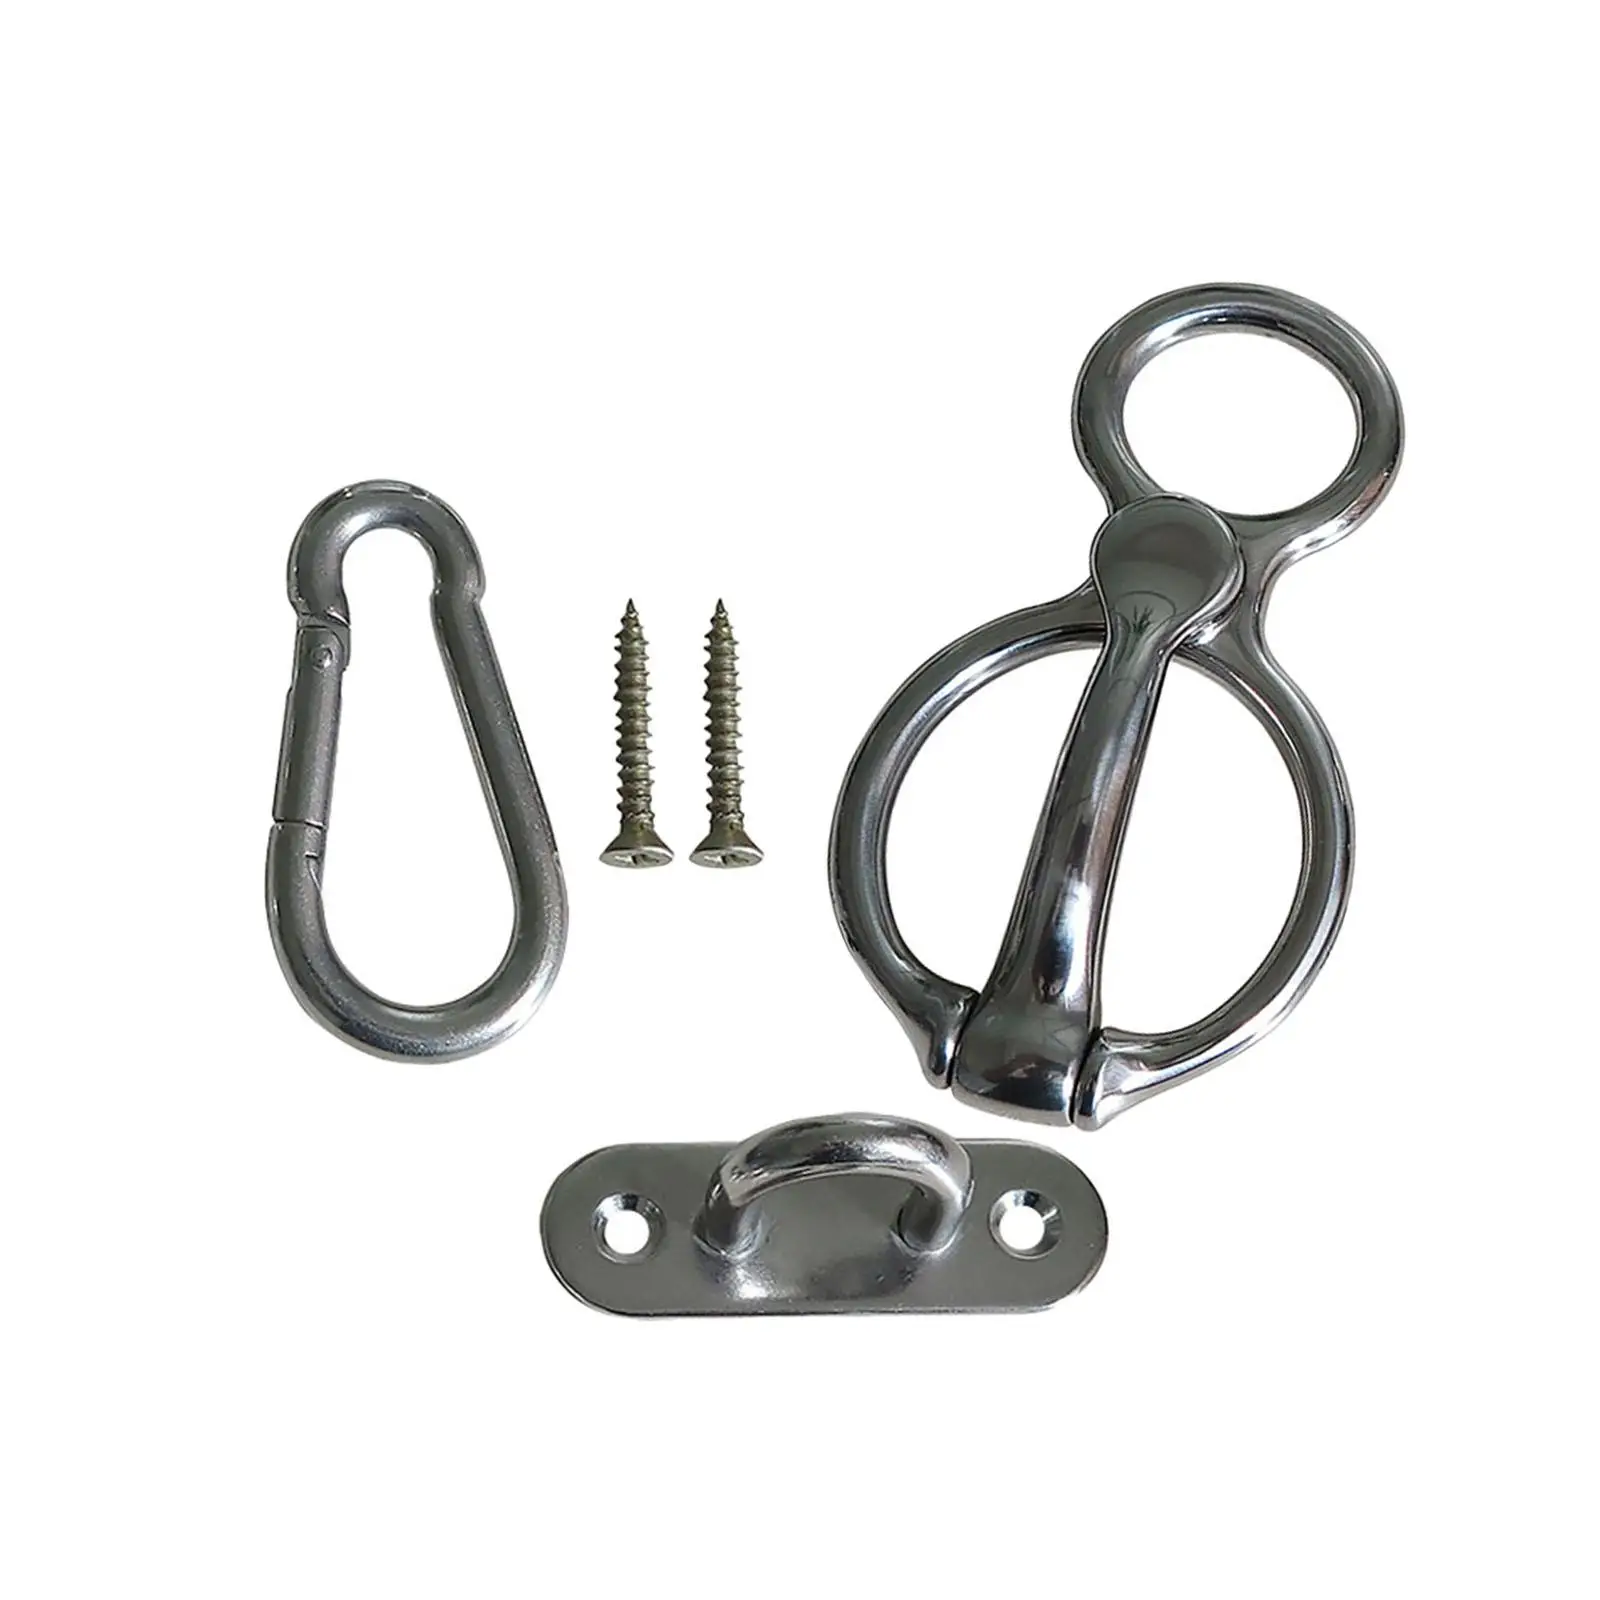 Horse Tie Ring Snap Outdoor Sports Stainless Steel Livestock Tie Off with Eye Bolt Safety Accessories Horse Tack Supplies